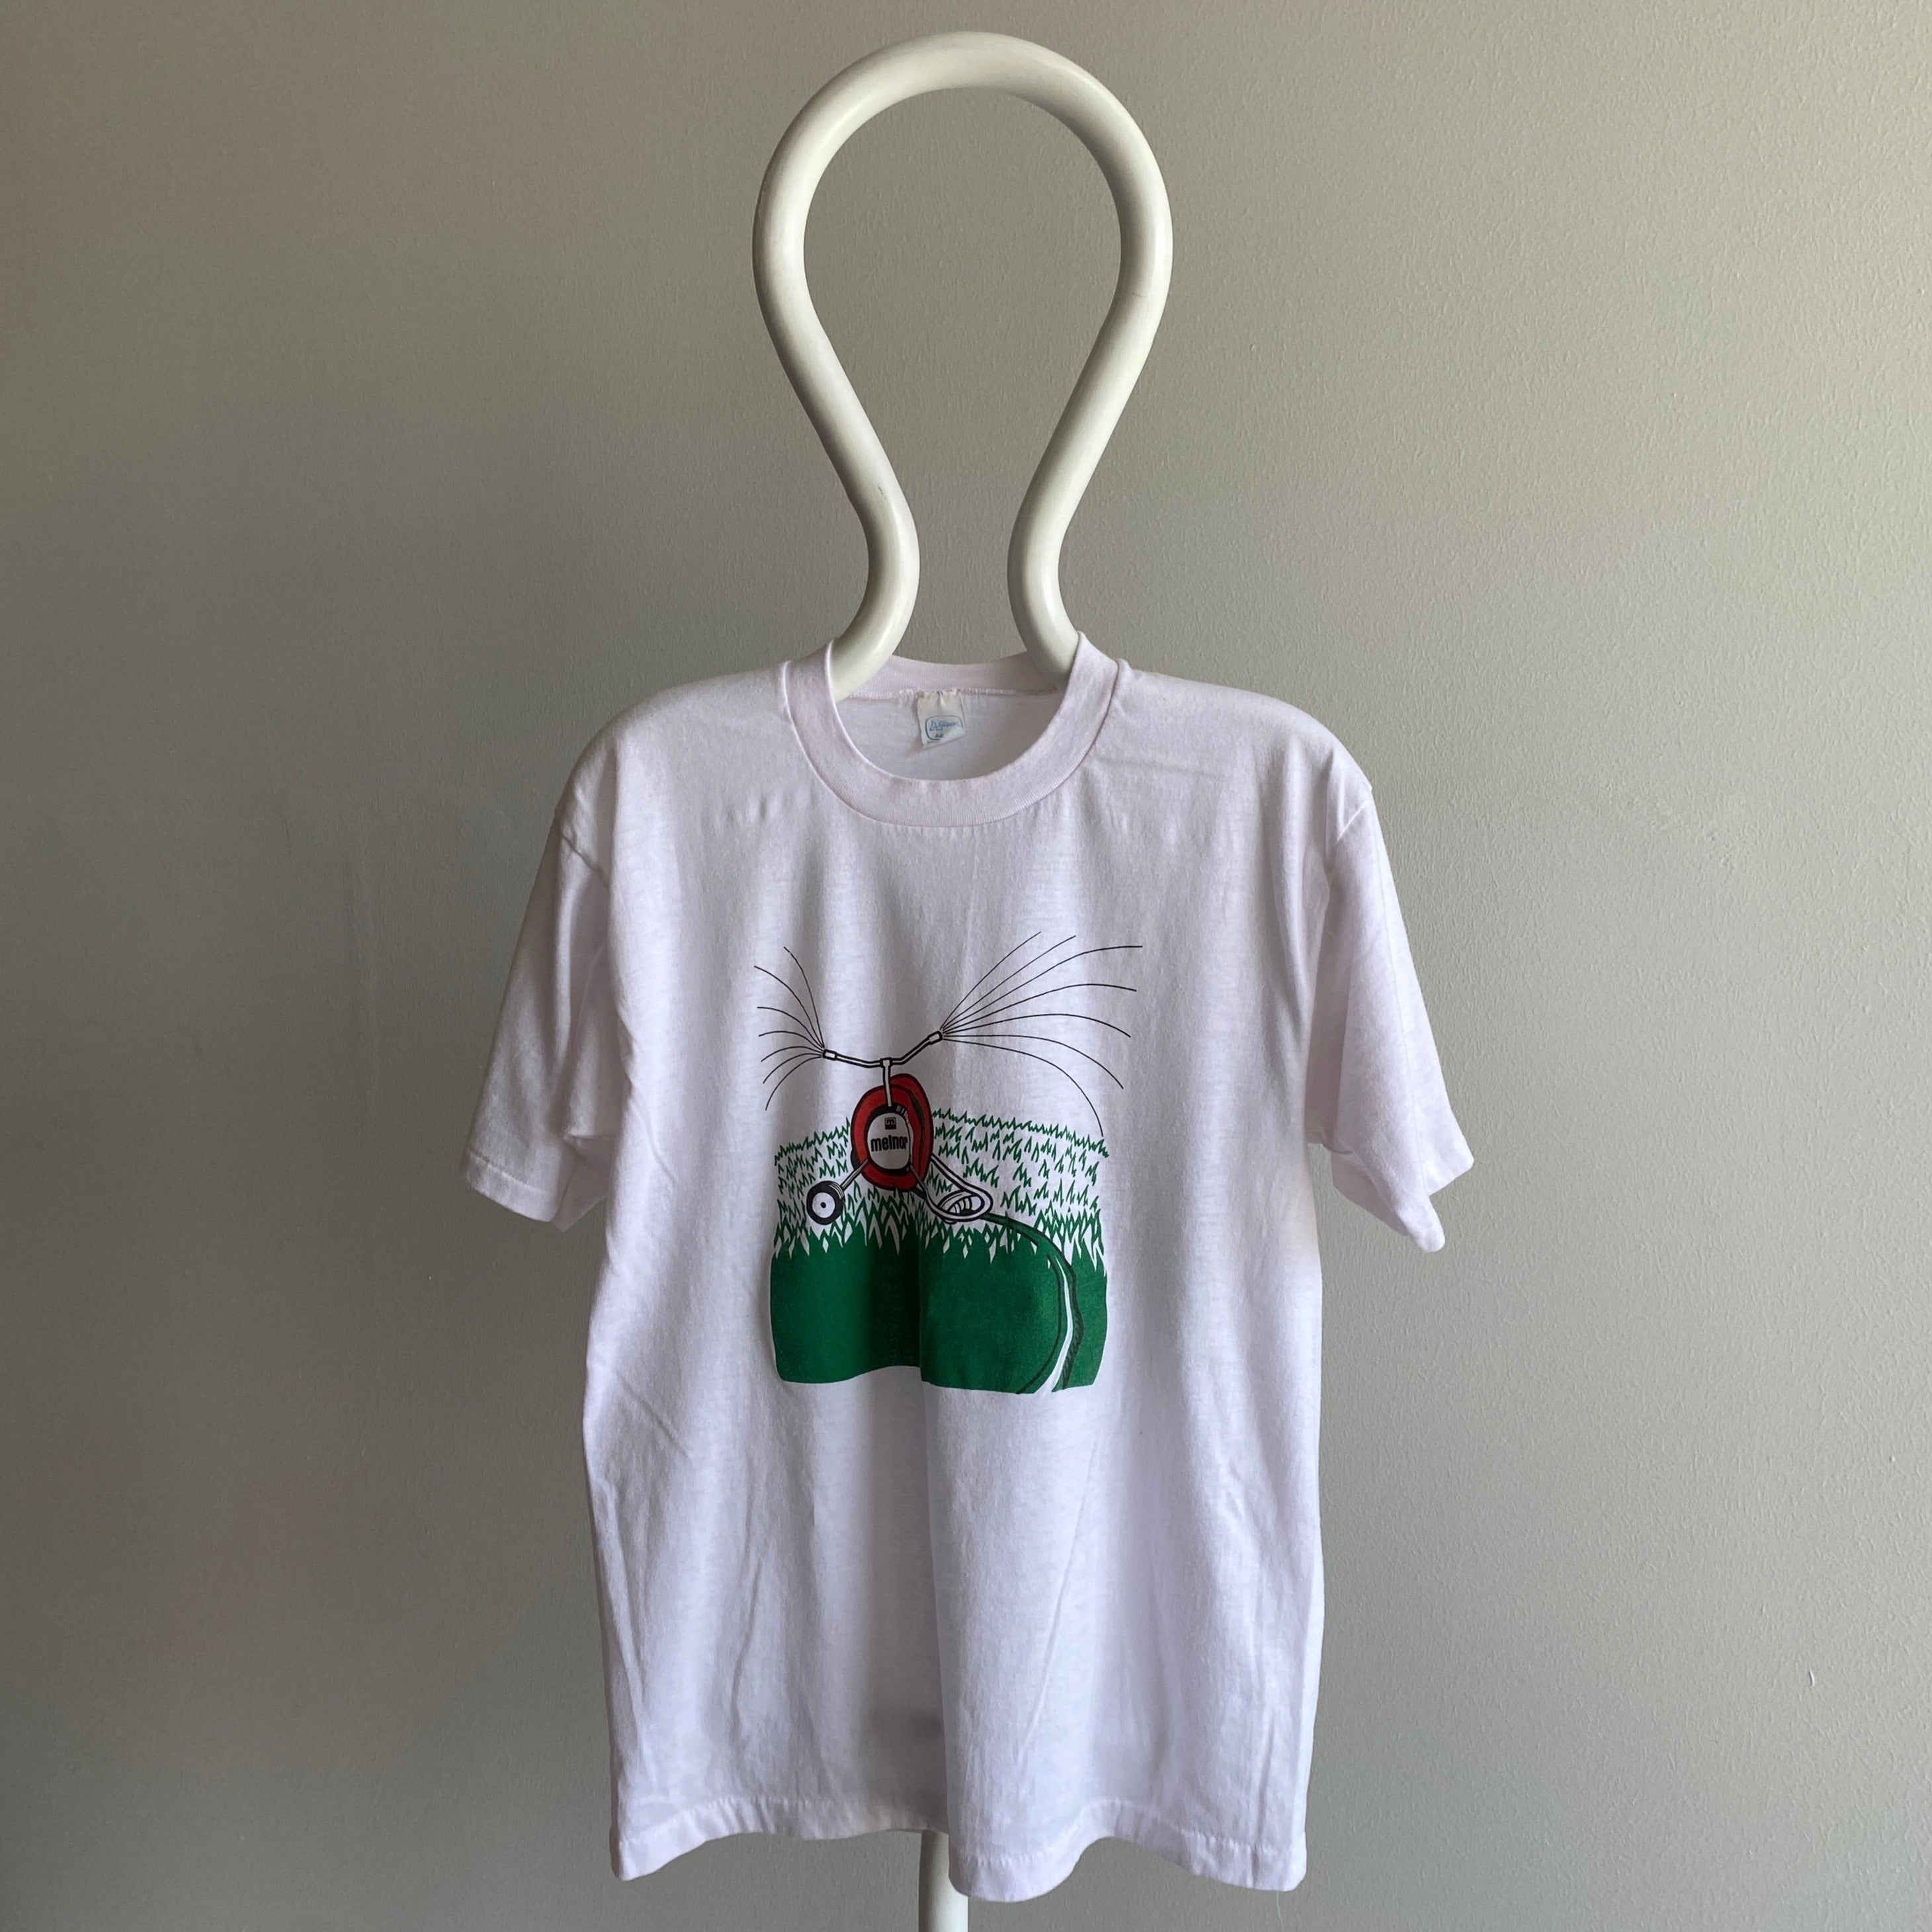 1980s Melnor Sprinkler Graphic T-Shirt - It's Random and I Love It